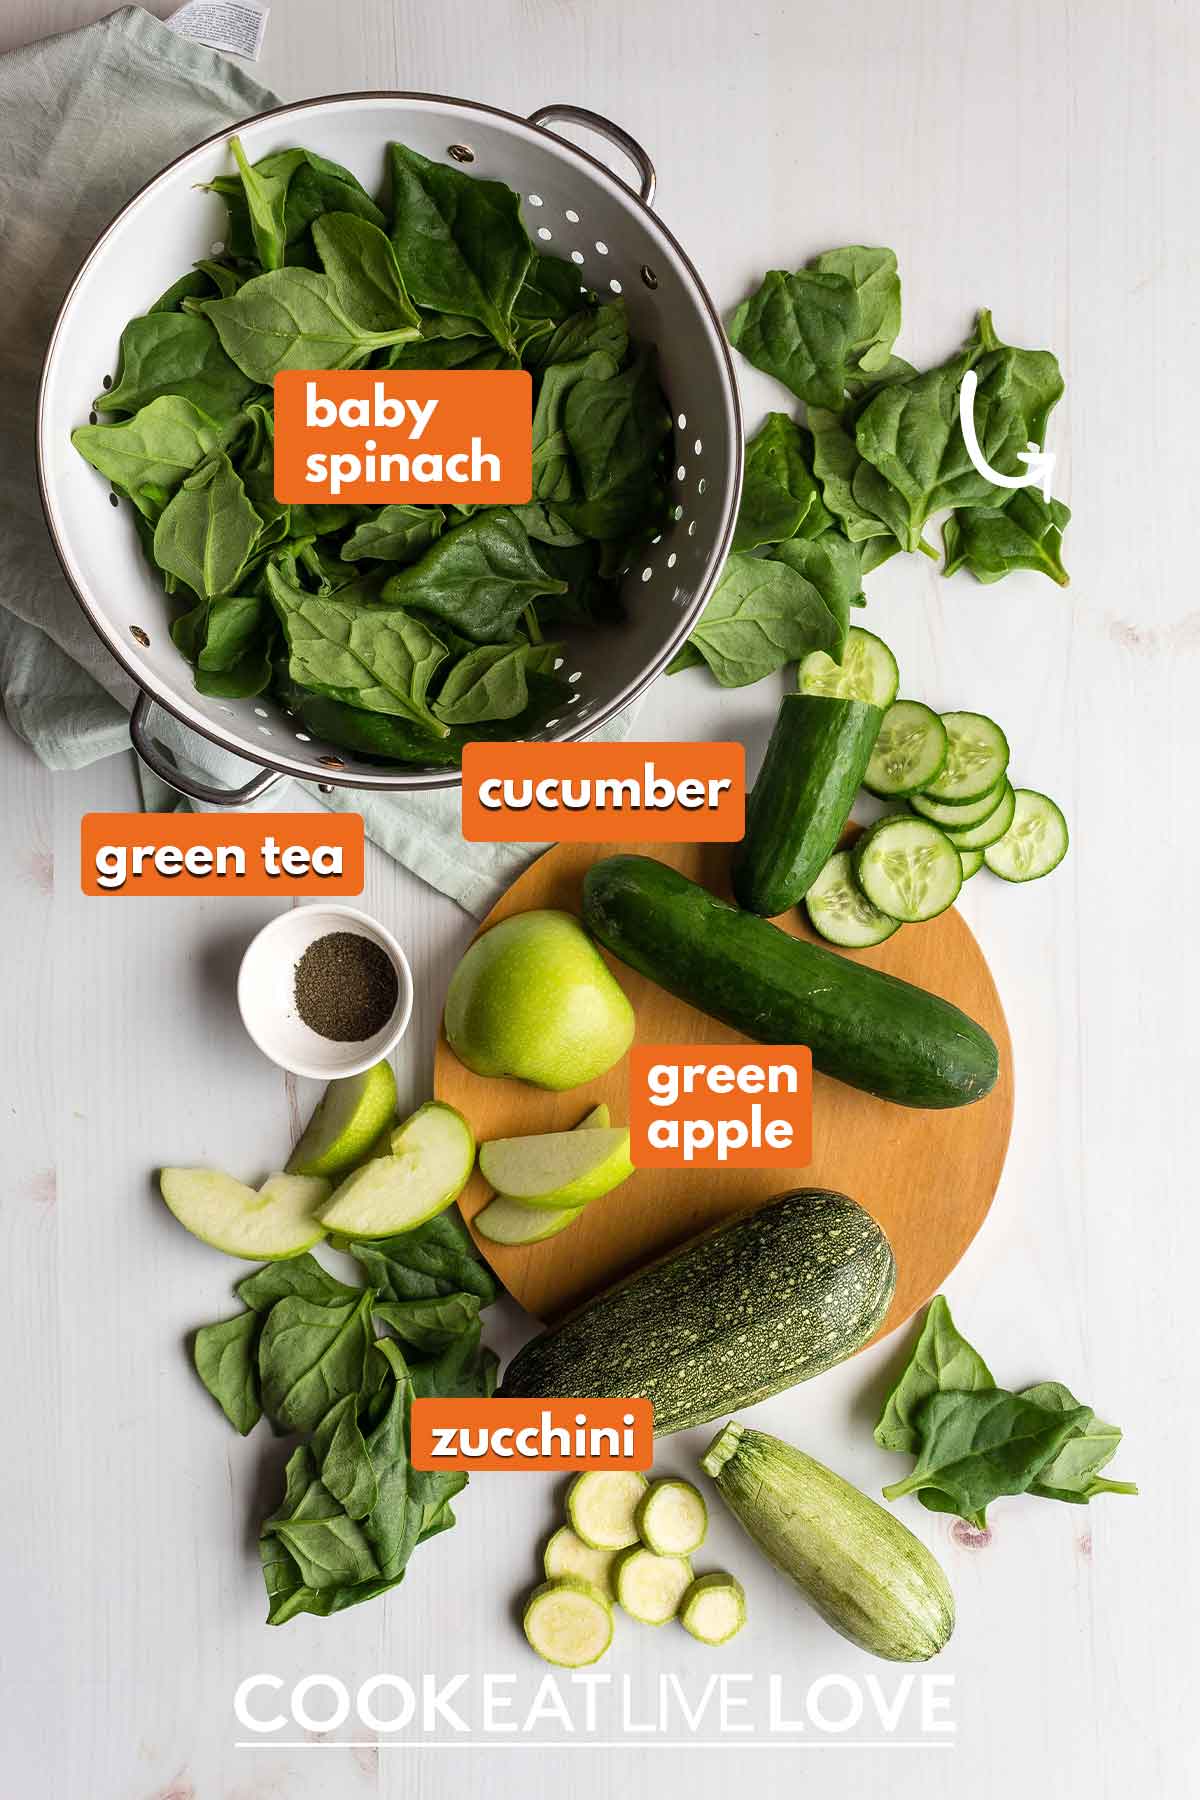 Ingredients to make green smoothie base on the table.